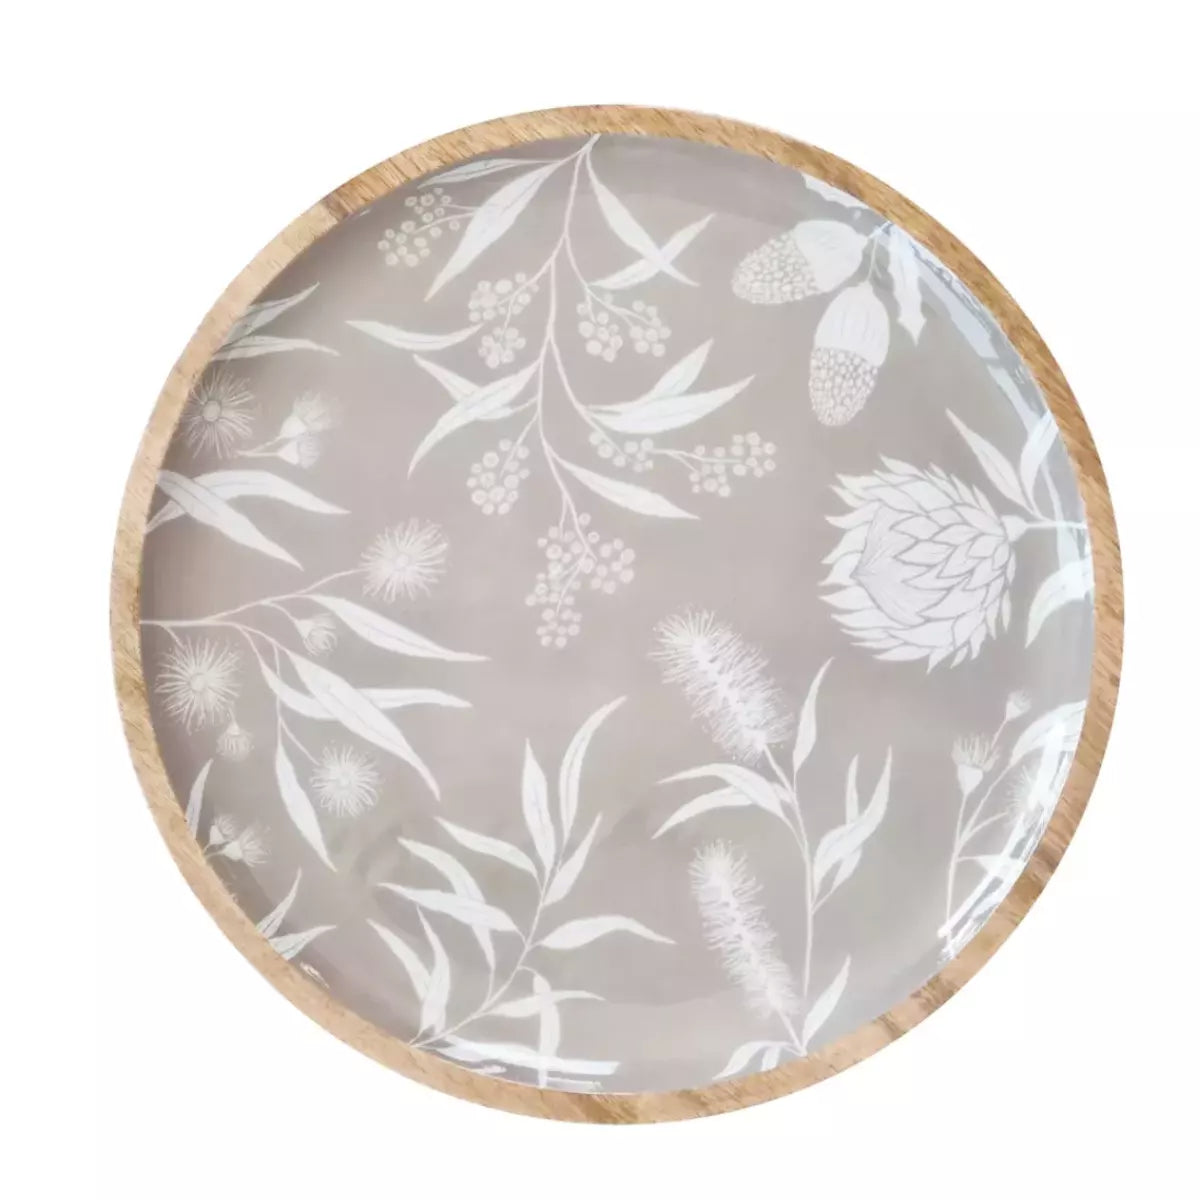 A Bindi Round Serving Tray, made from natural materials, featuring a native design of eucalyptus leaves on a grey and white plate by j.elliot.